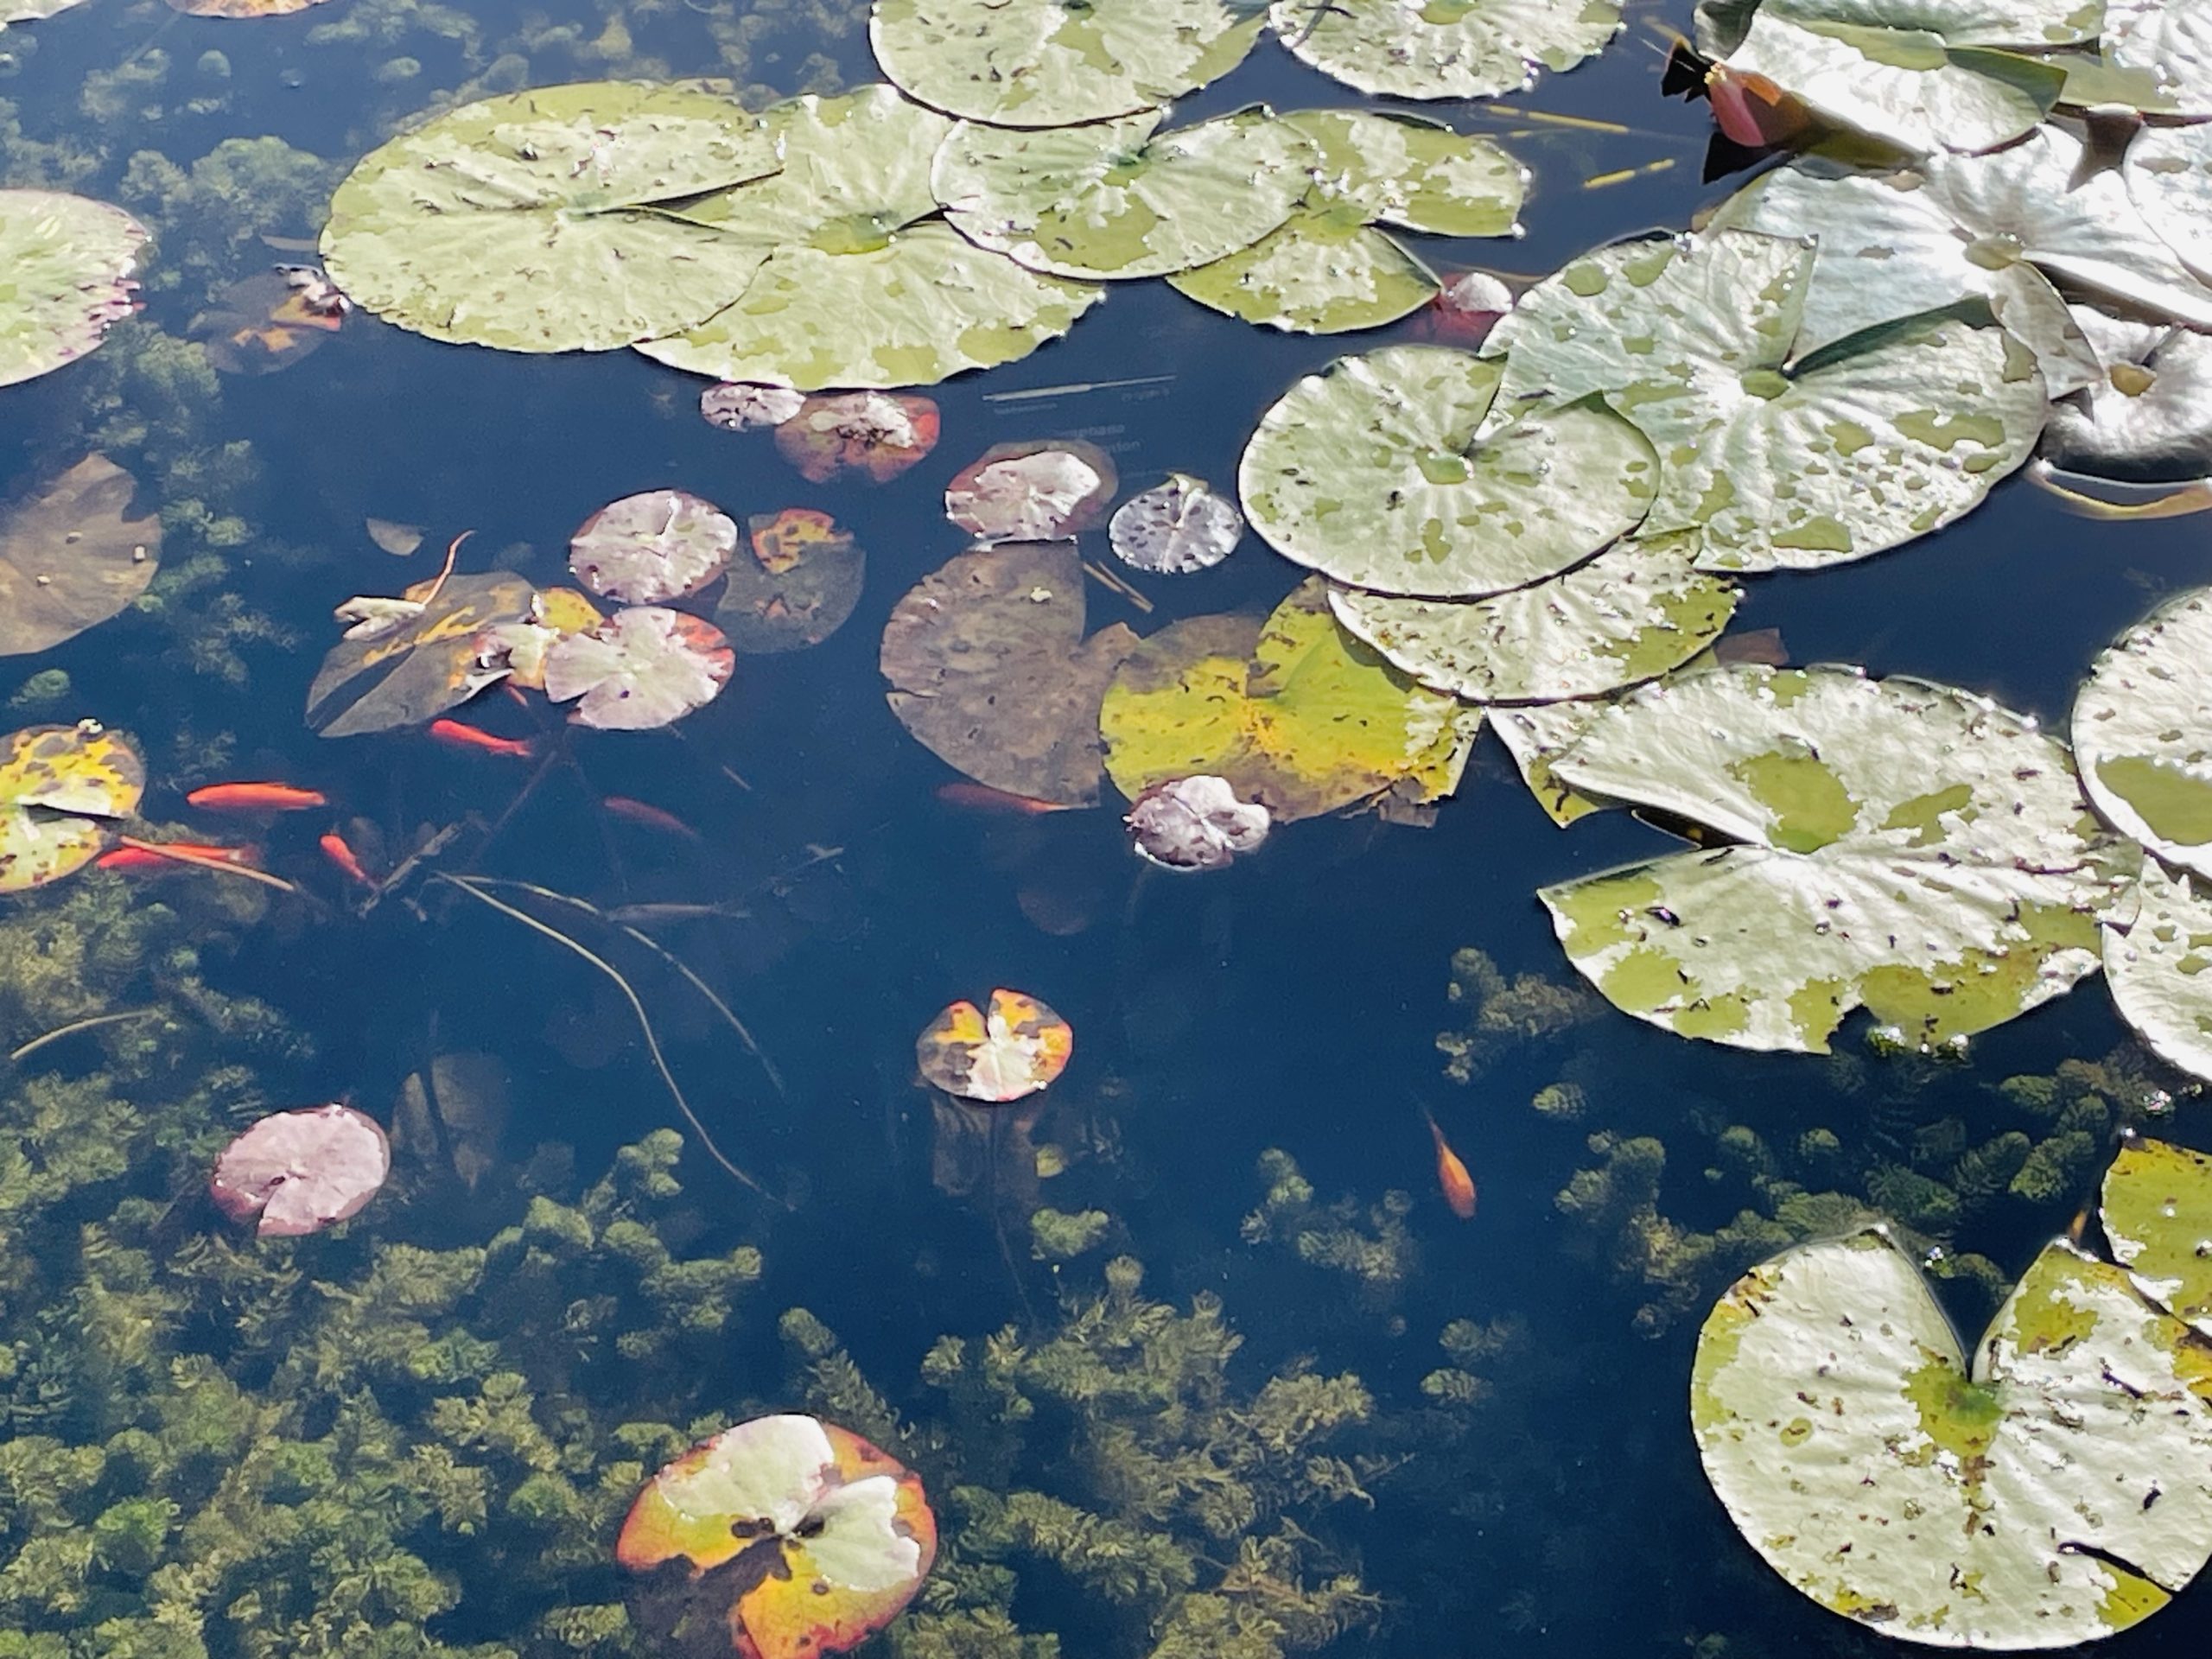 Lily pads on a pond with fish